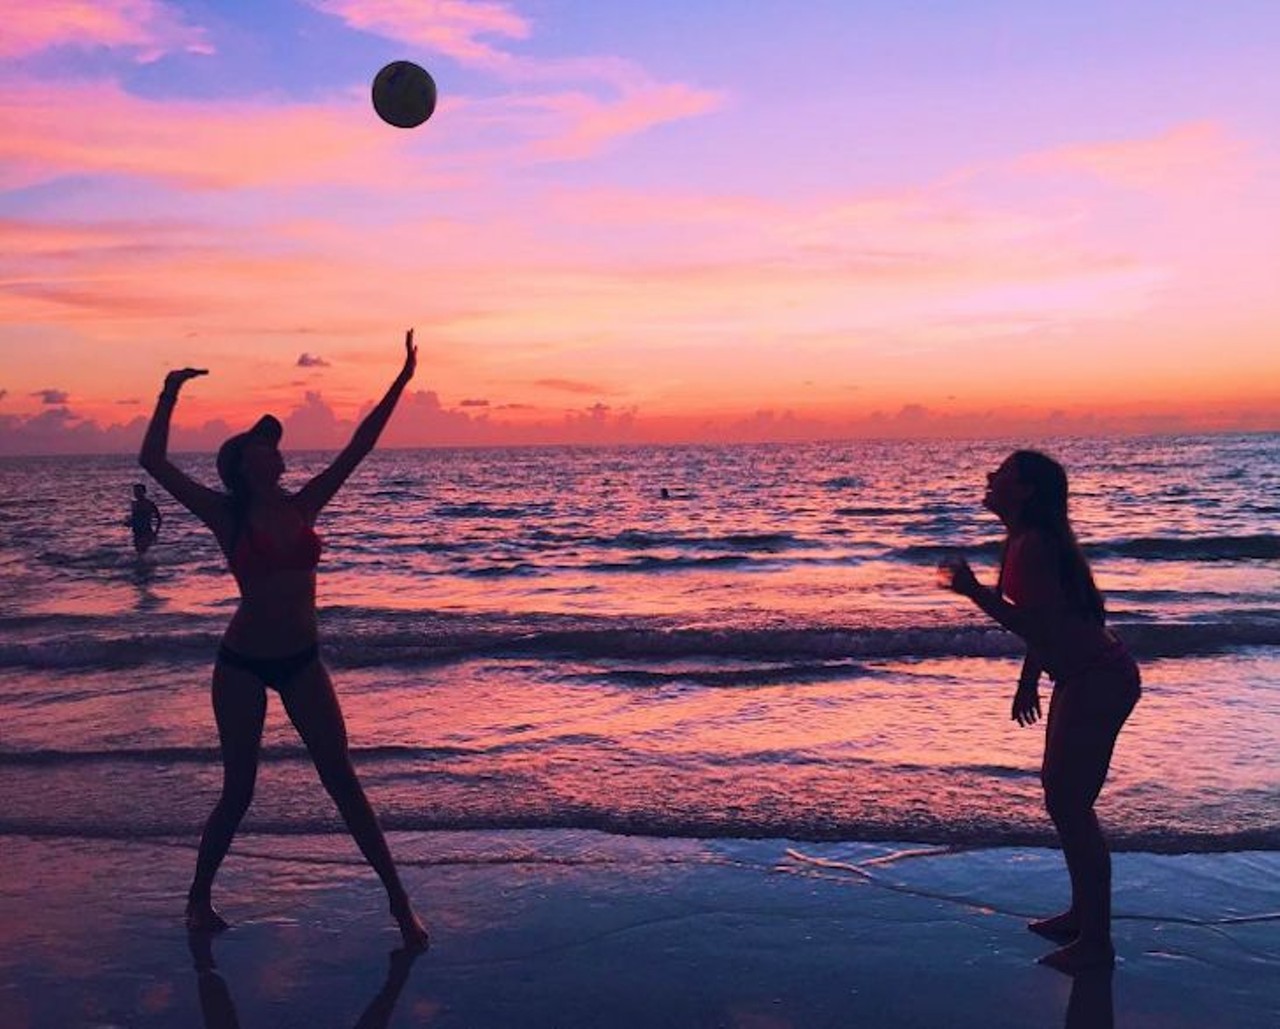 Pass-a-Grille Beach
2 hours away
This quaint, laid-back beach town offers seaside paradise within walking distance of an eclectic mix of boutiques, ice cream shops, outdoor art markets and restaurants. It&#146;s the beach-loving hipster&#146;s dream. 
Photo via laurenluddd/Instagram